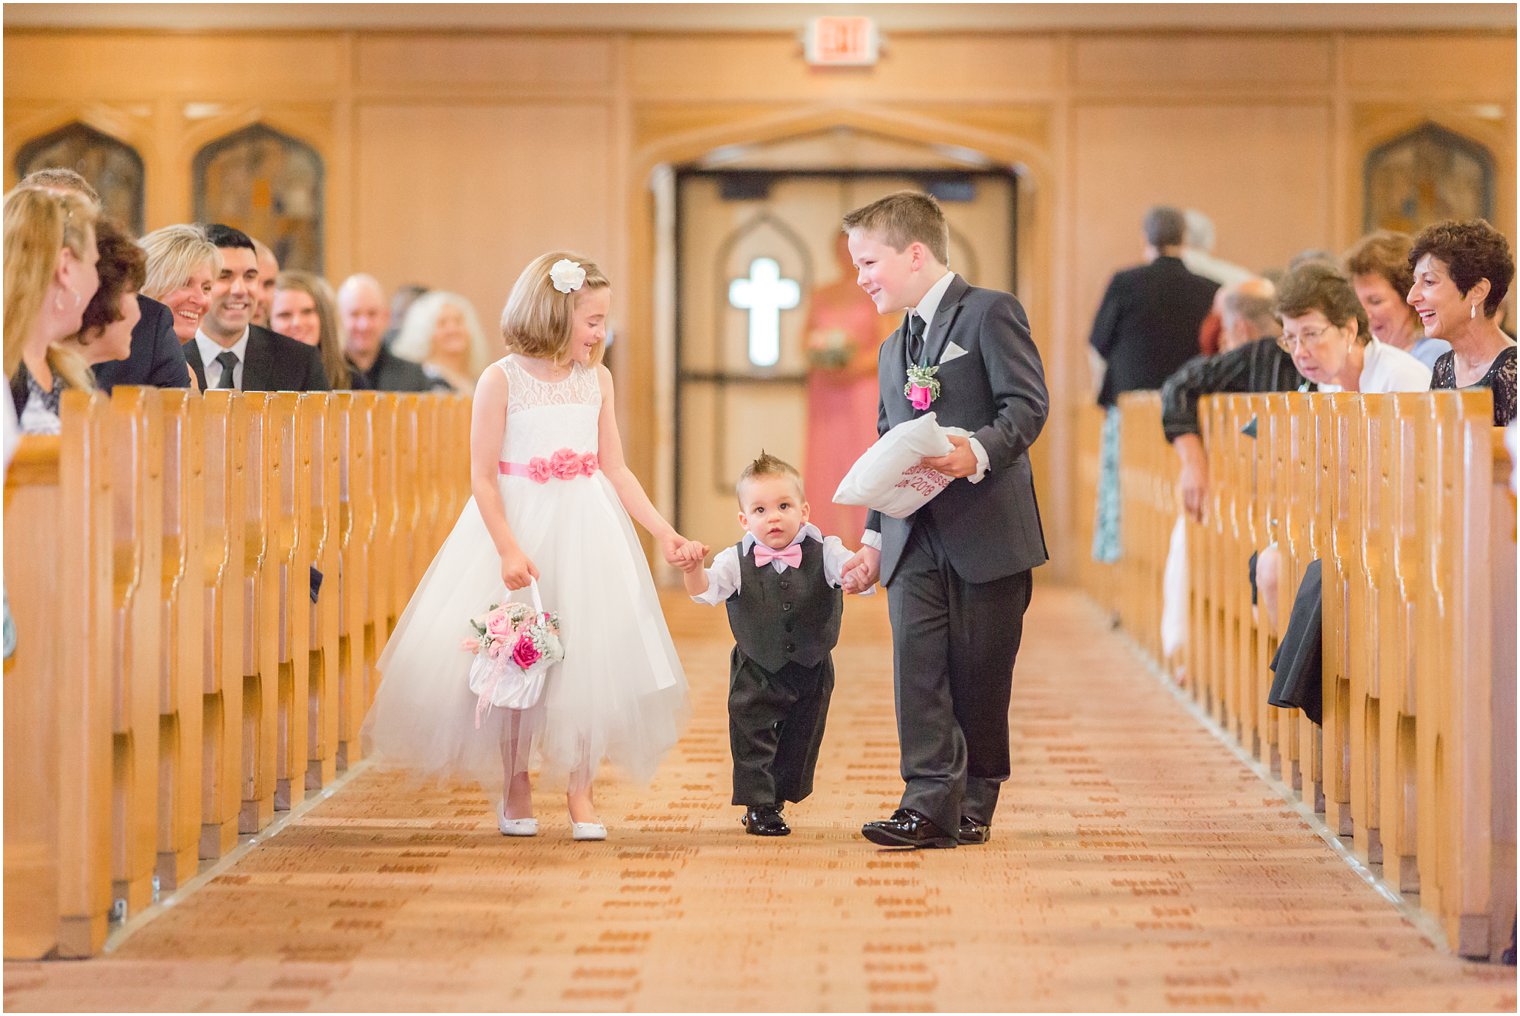 ring bearers and flower girl walking down the aisle